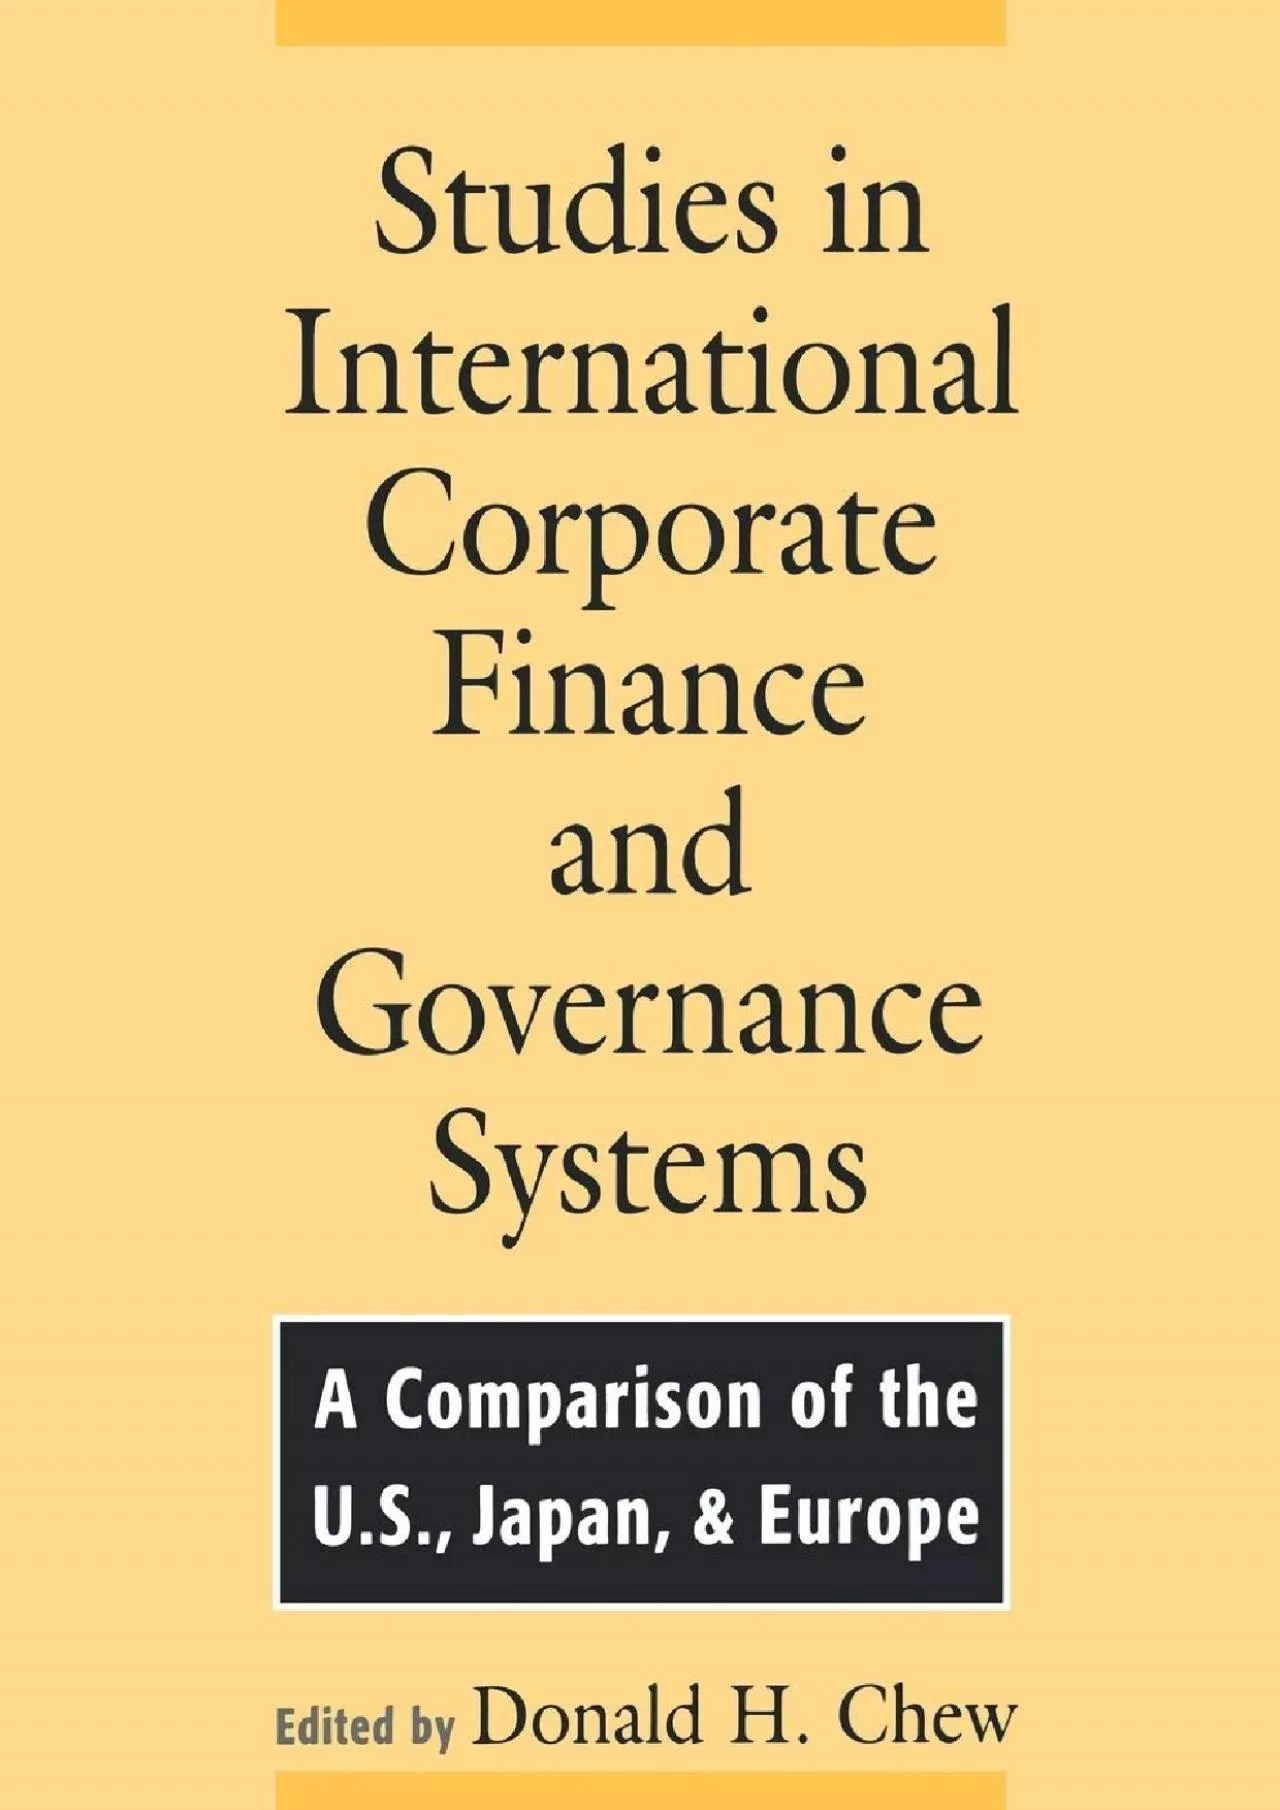 Studies in International Corporate Finance and Governance Systems: A Comparison of the